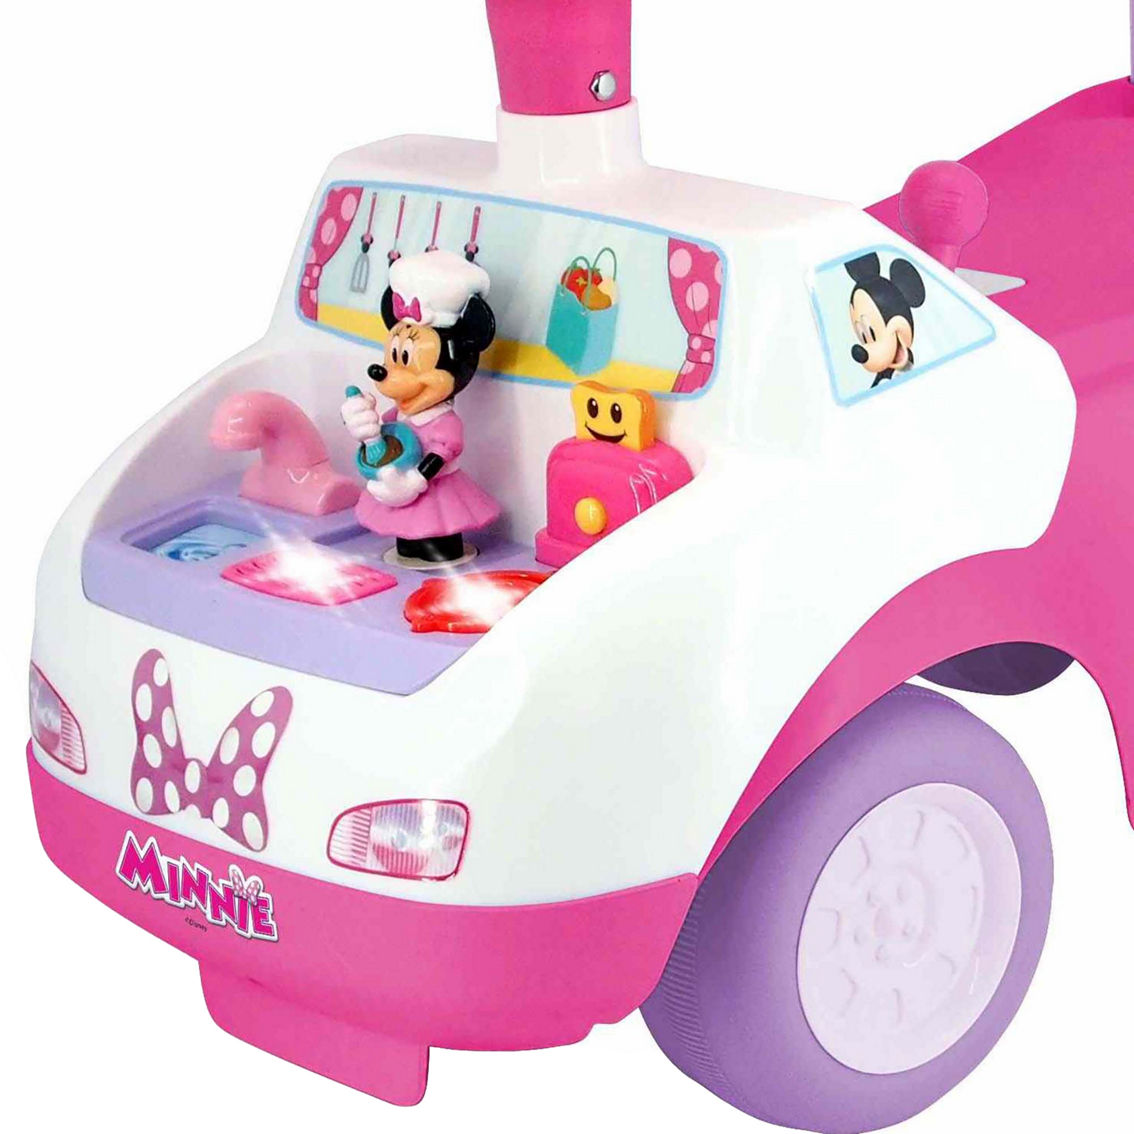 Disney Lights N' Sounds Minnie Mouse Happy Kitchen Activity Ride-On - Image 2 of 5